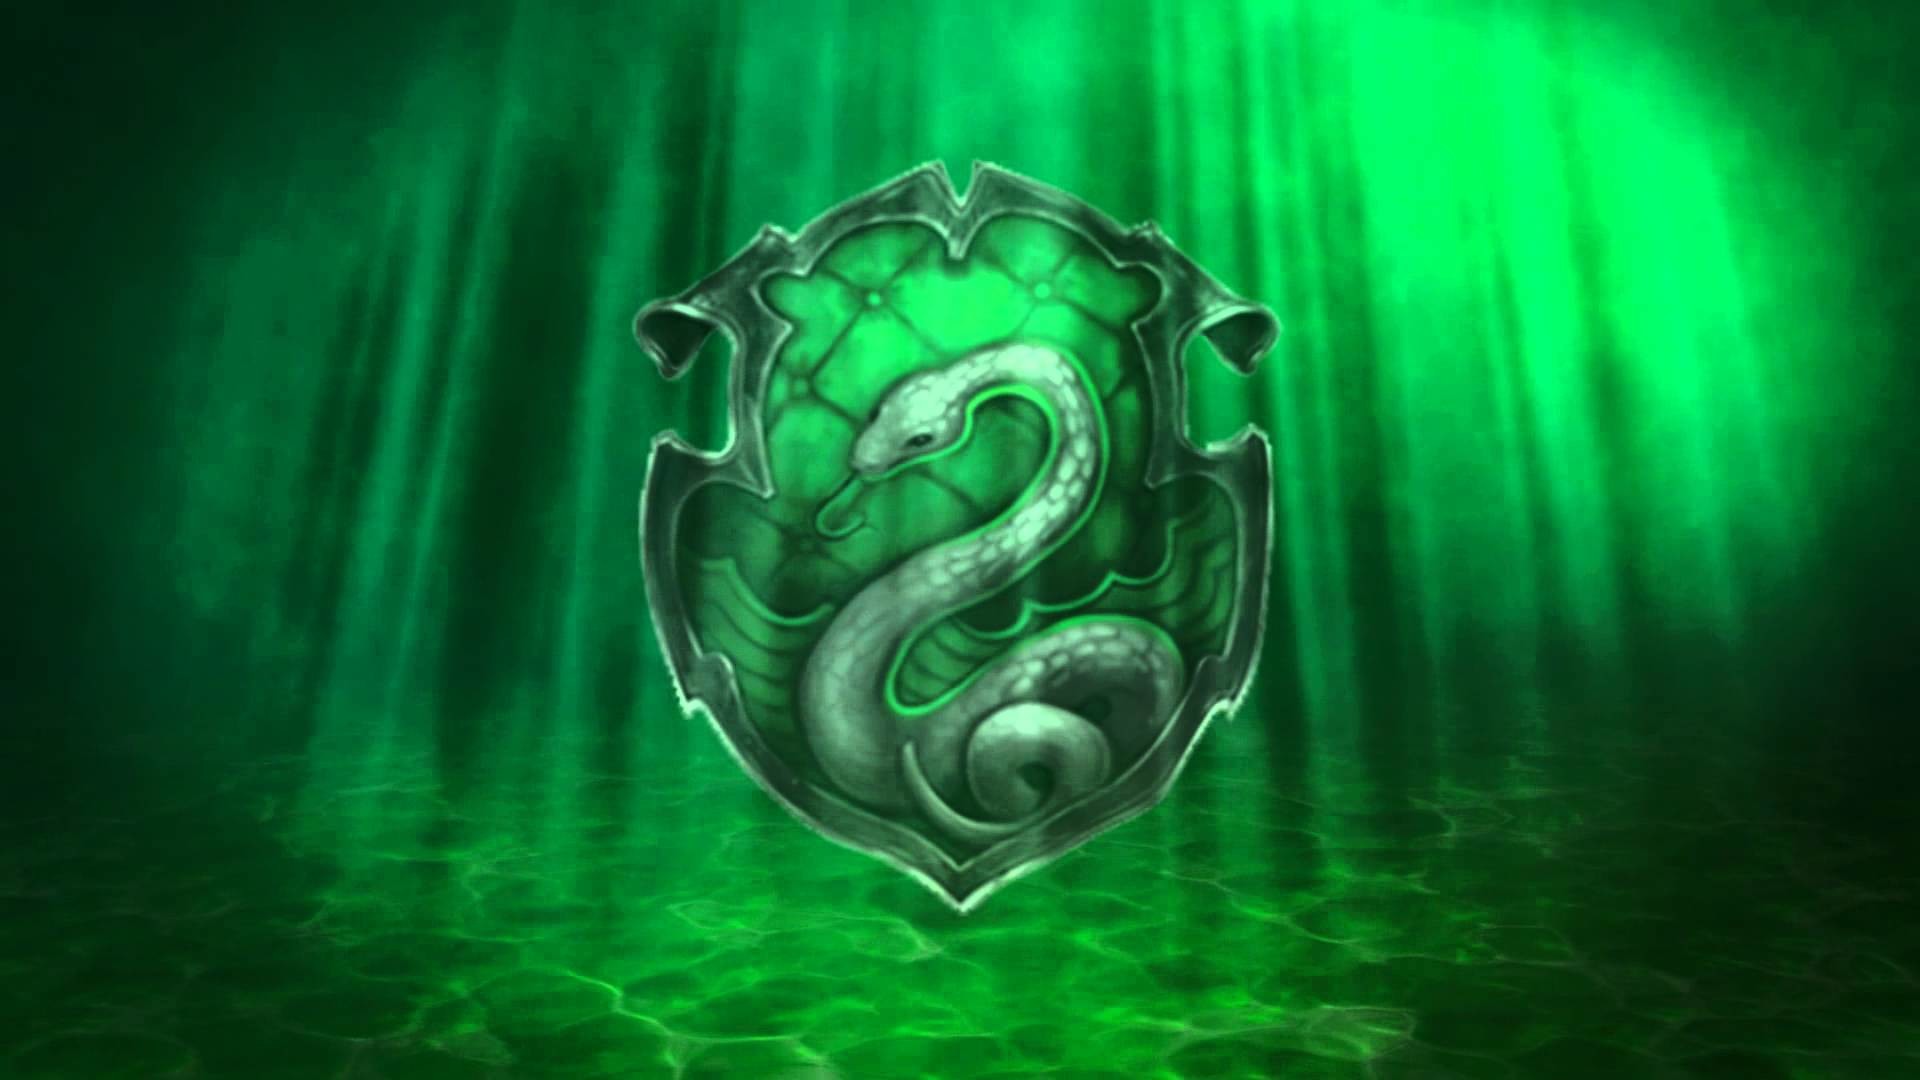 1920x1080 After Effects - Slytherin water